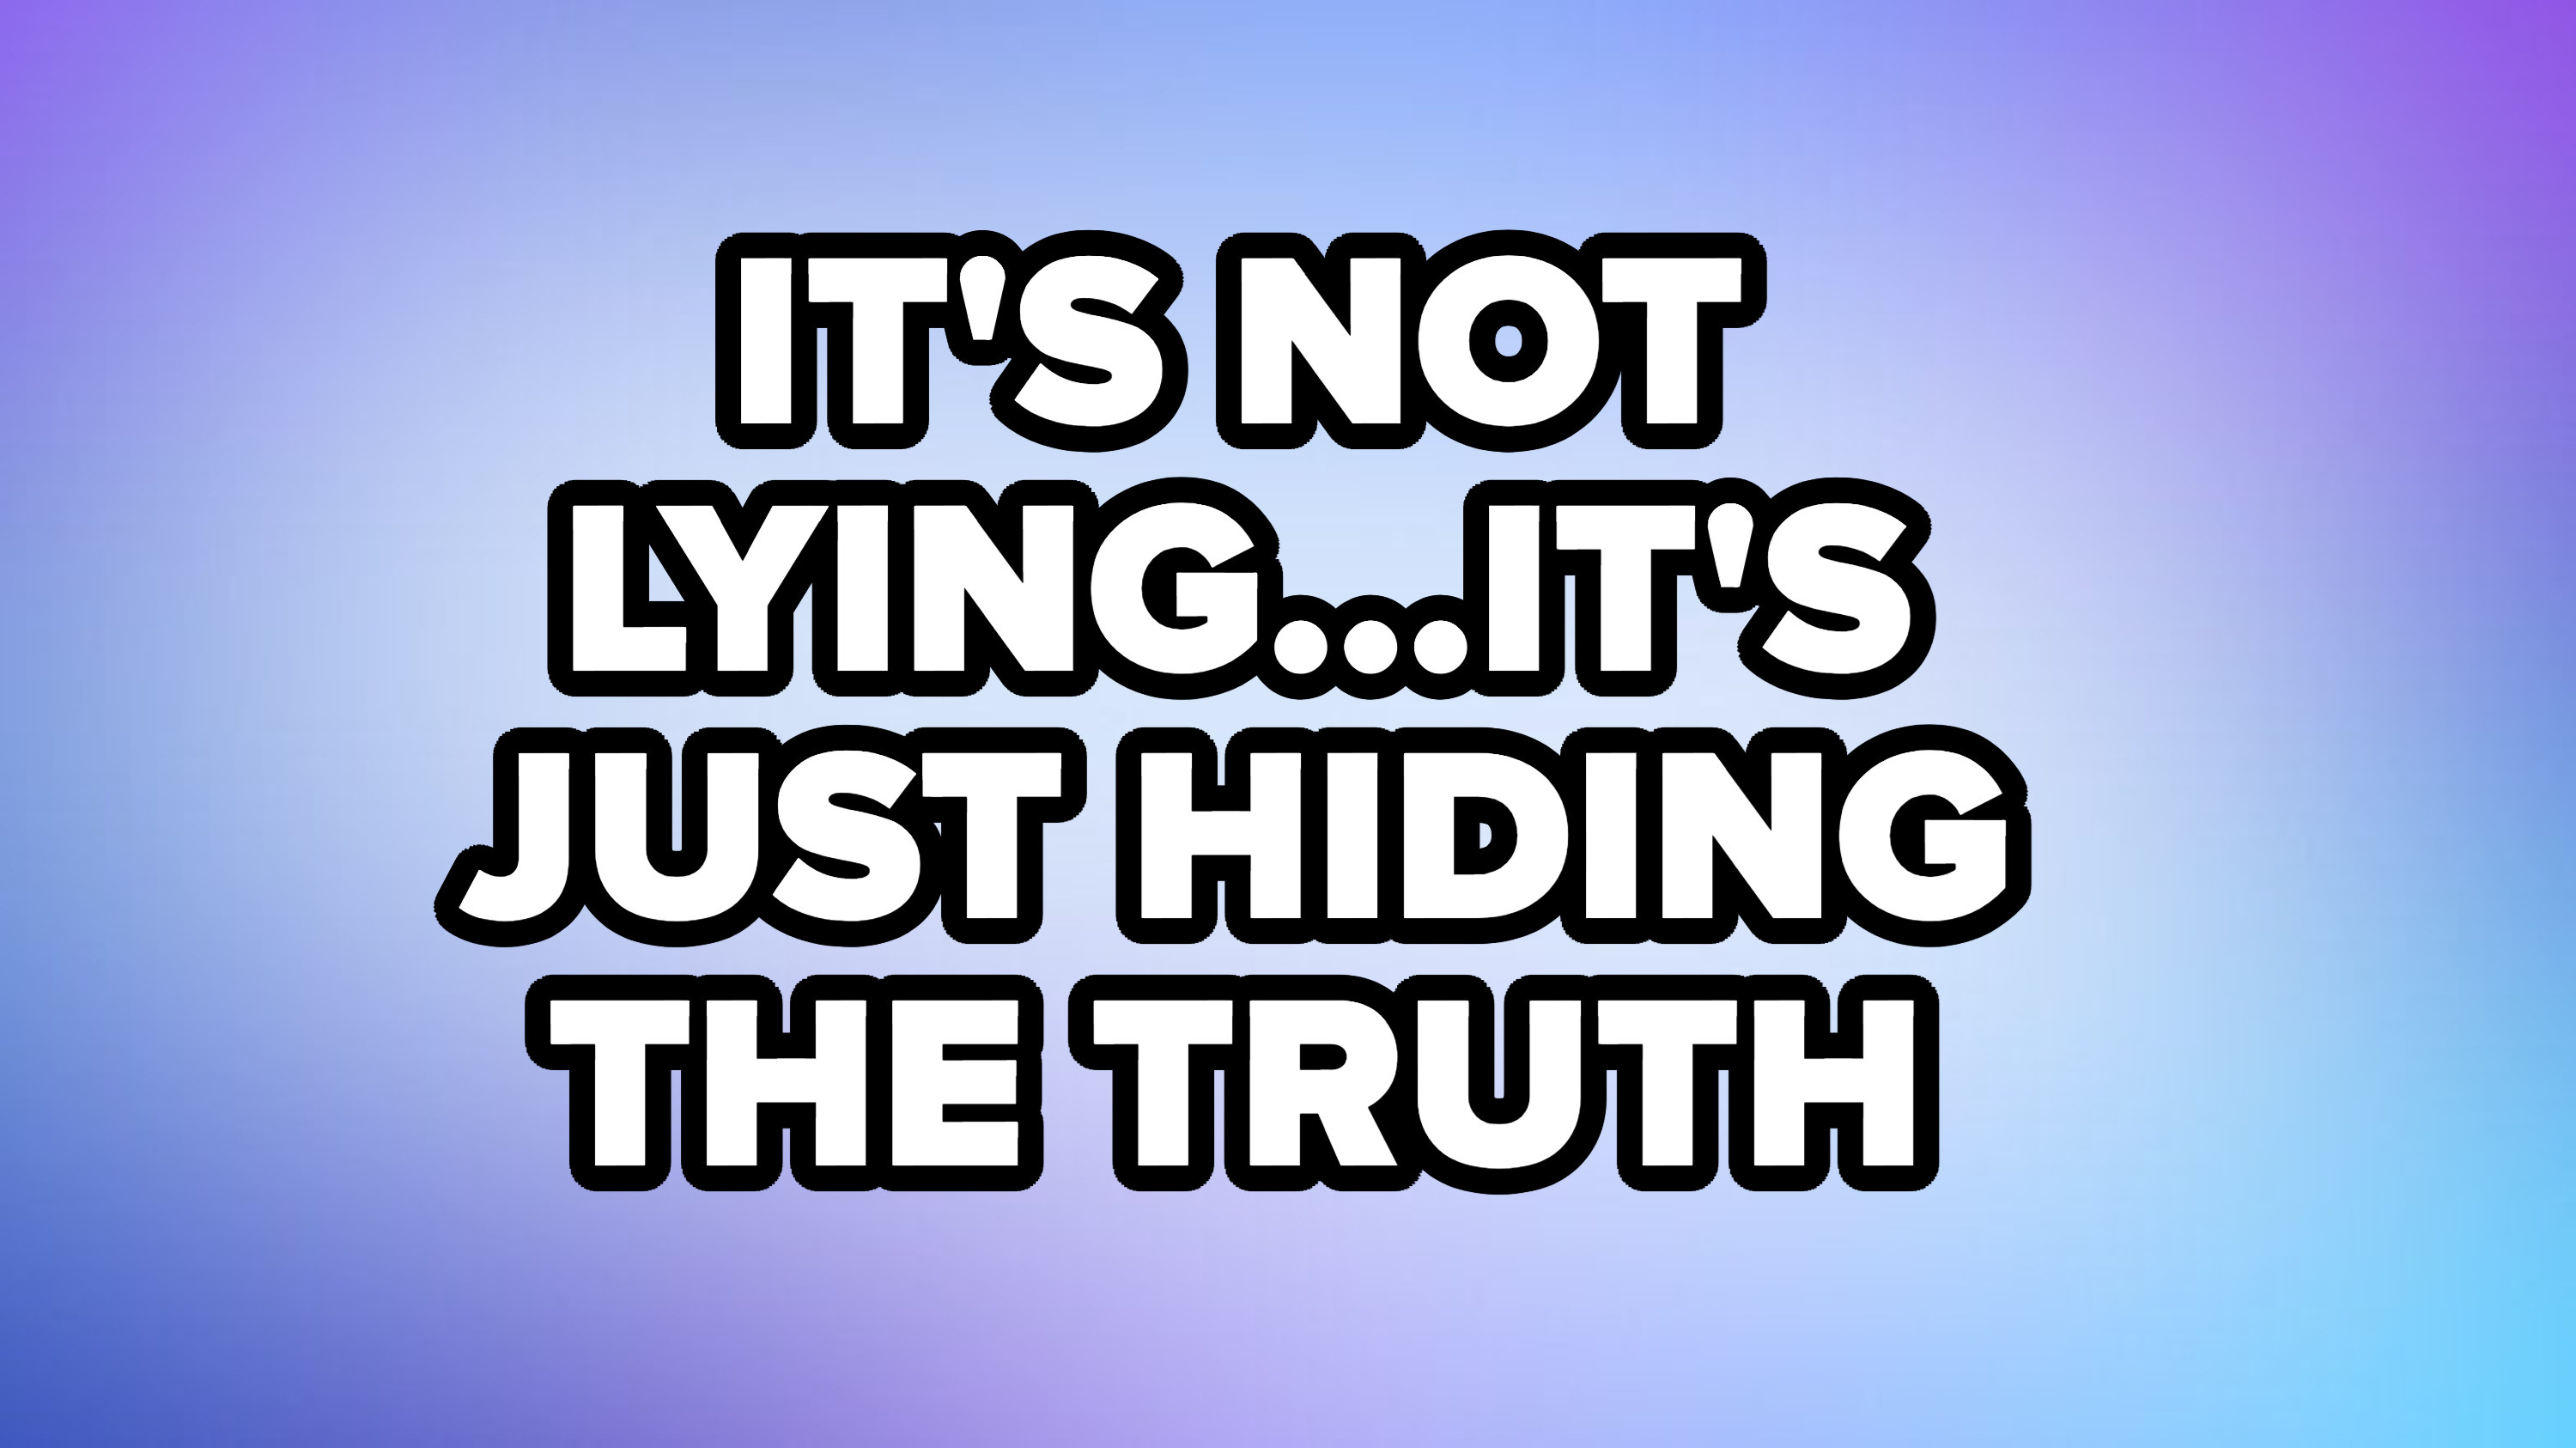 &quot;It&#x27;s not lying...it&#x27;s just hiding the truth&quot;